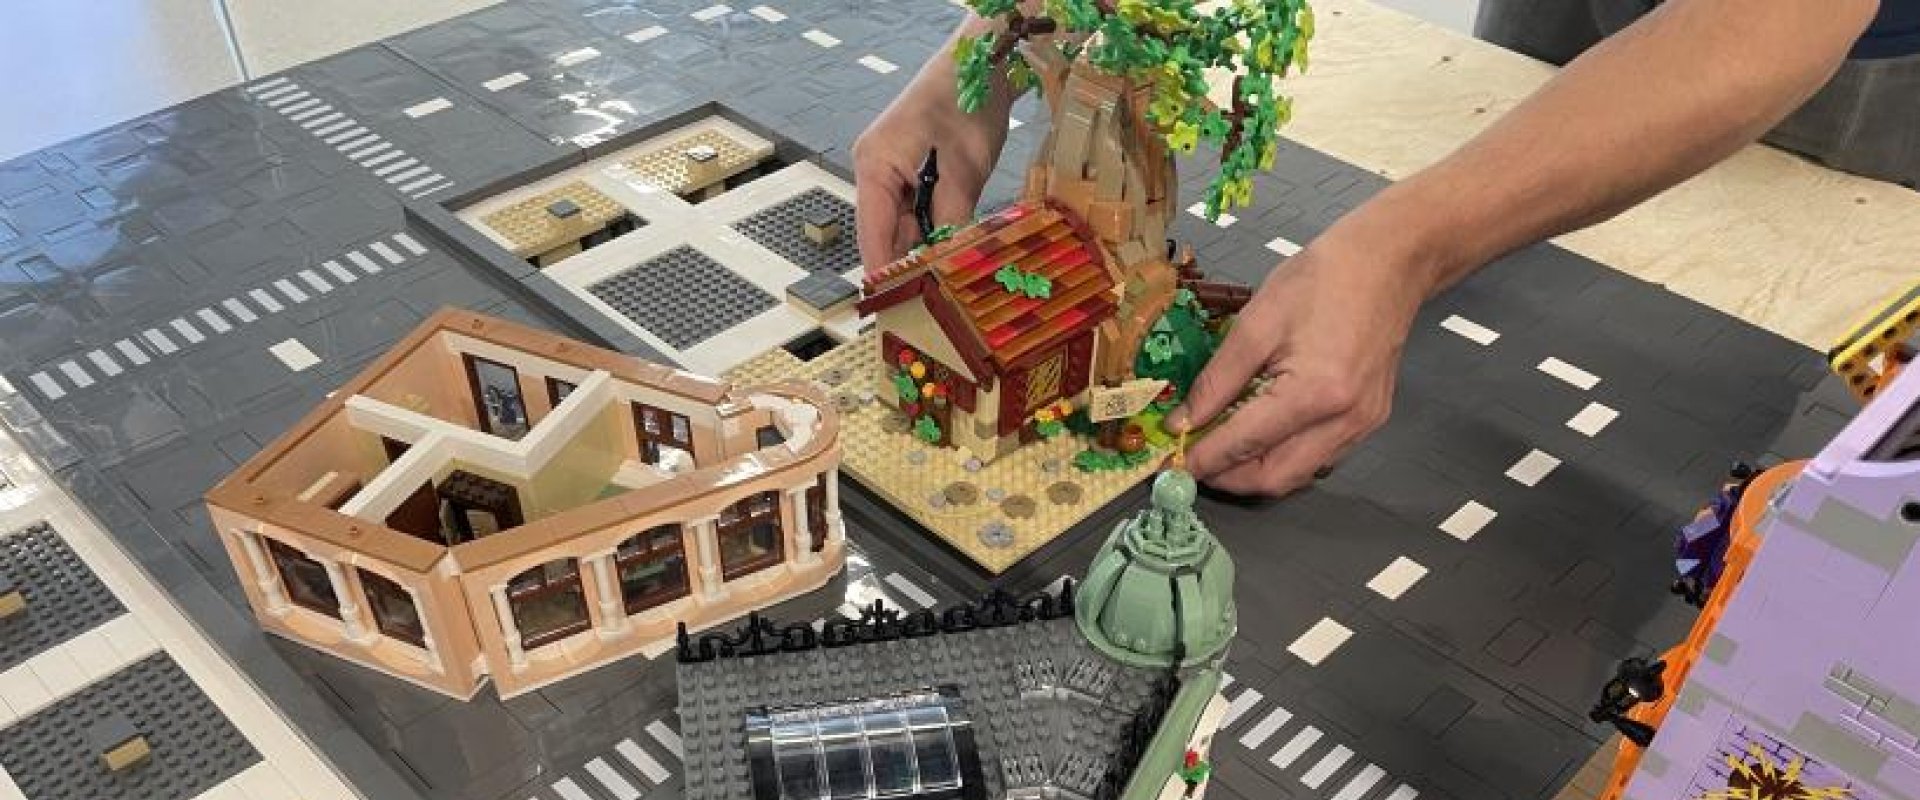 Building a city layout with Lego bricks